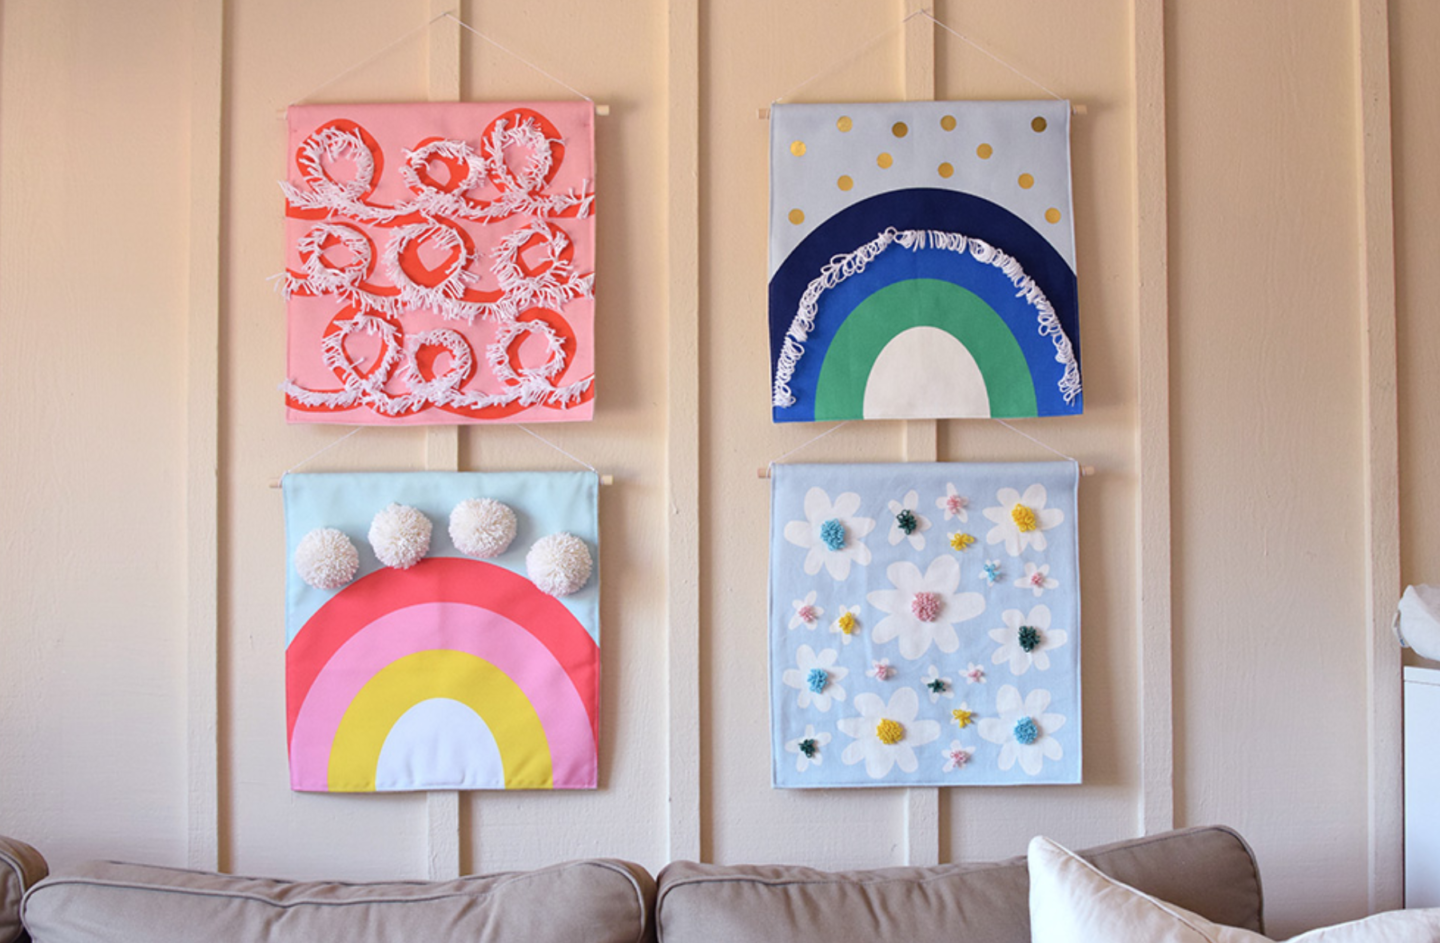 Four DIY Wallhangings from Spoonflower